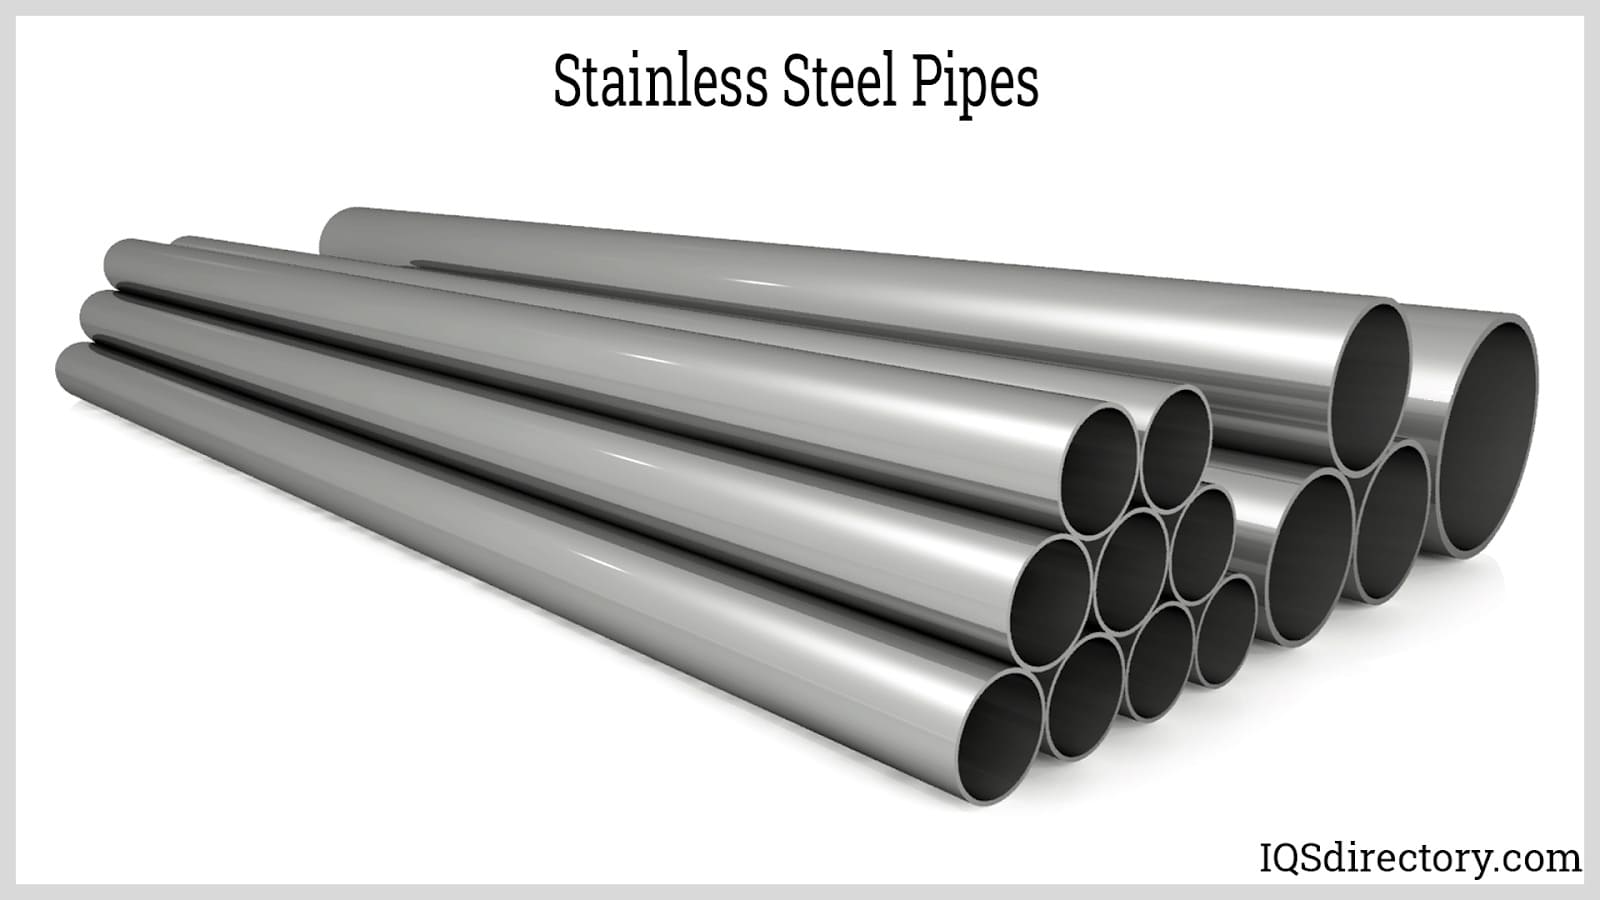 https://www.iqsdirectory.com/articles/stainless-steel/stainless-steel-316/stainless-steel-pipes.jpg